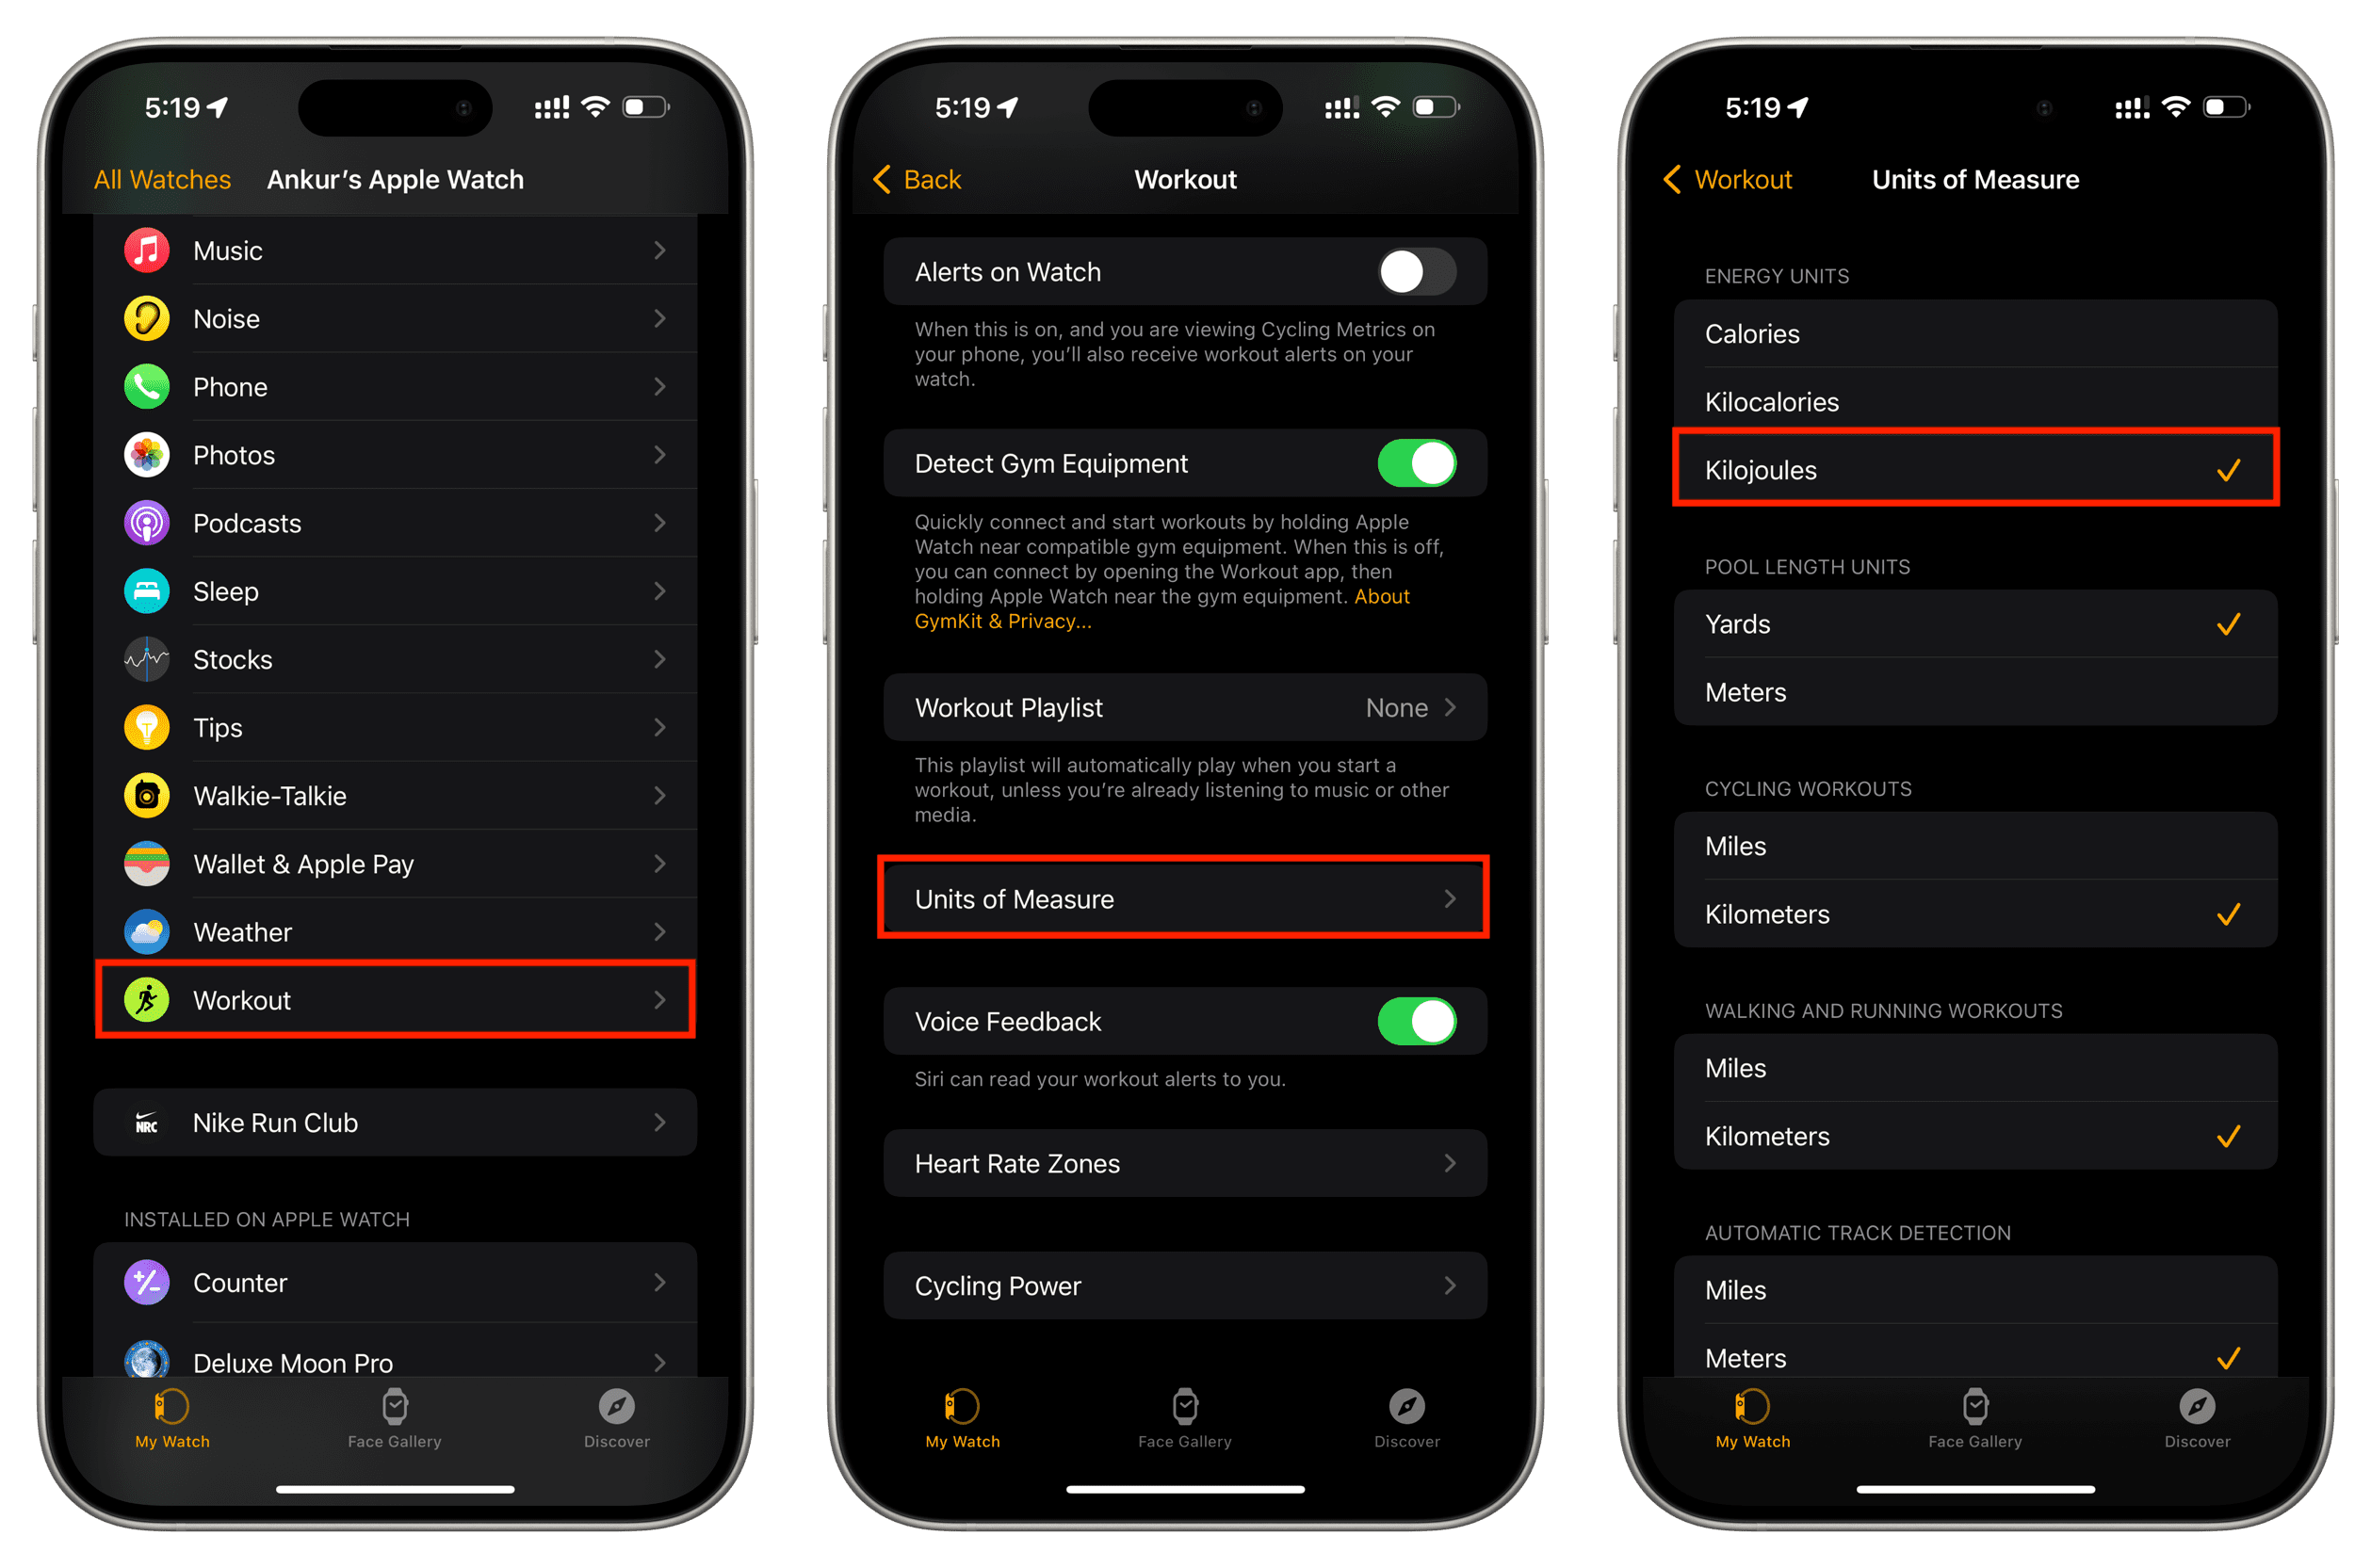 Change Energy Units to Kilojoules from Watch app on iPhone